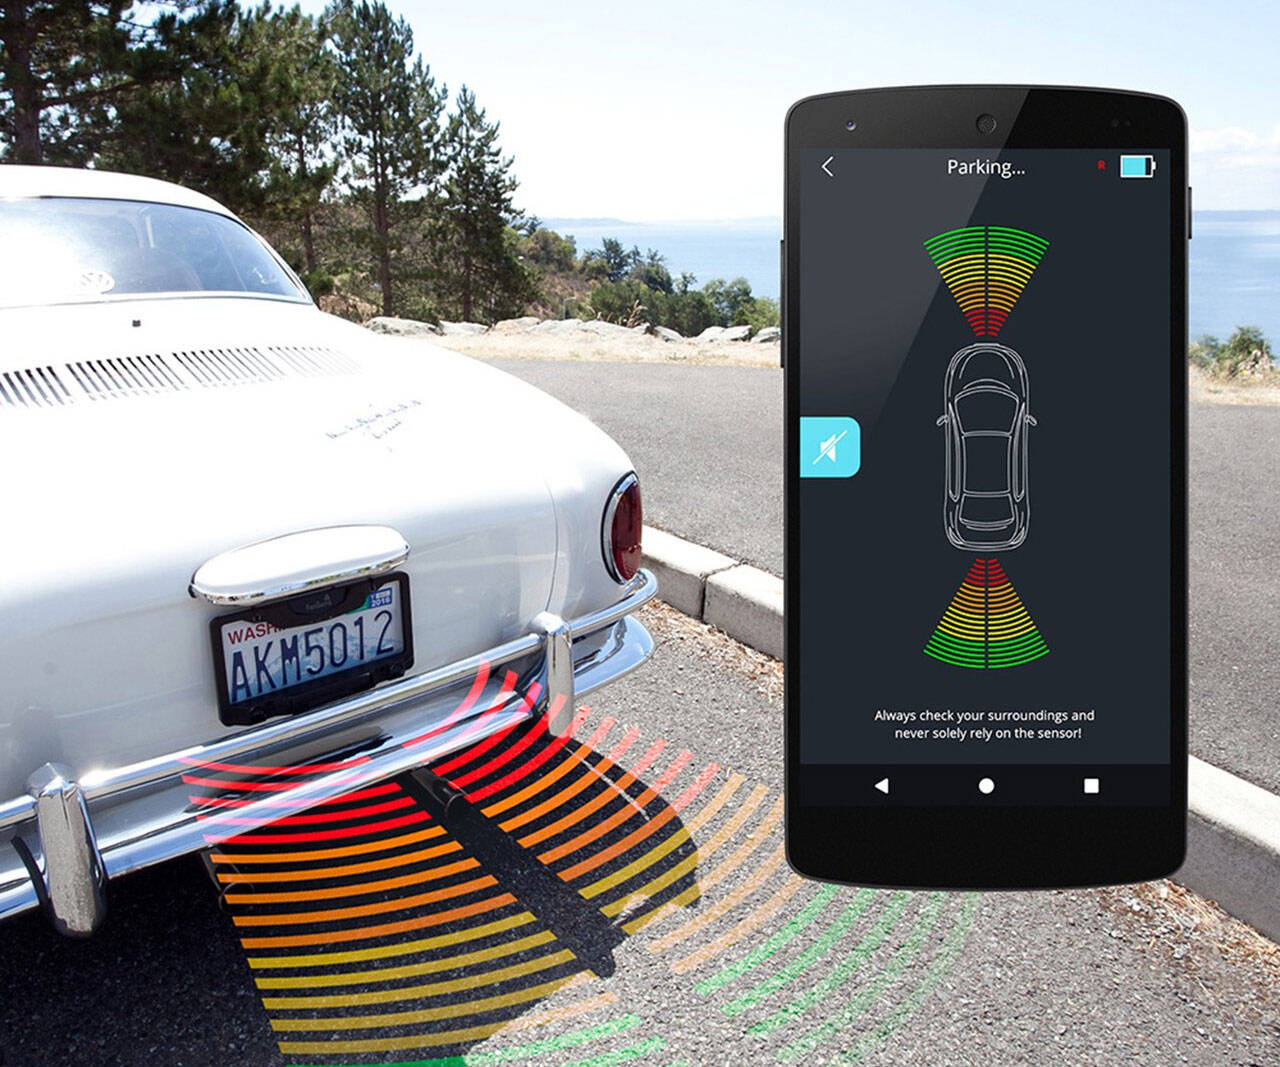 Wireless Parking Sensor - coolthings.us